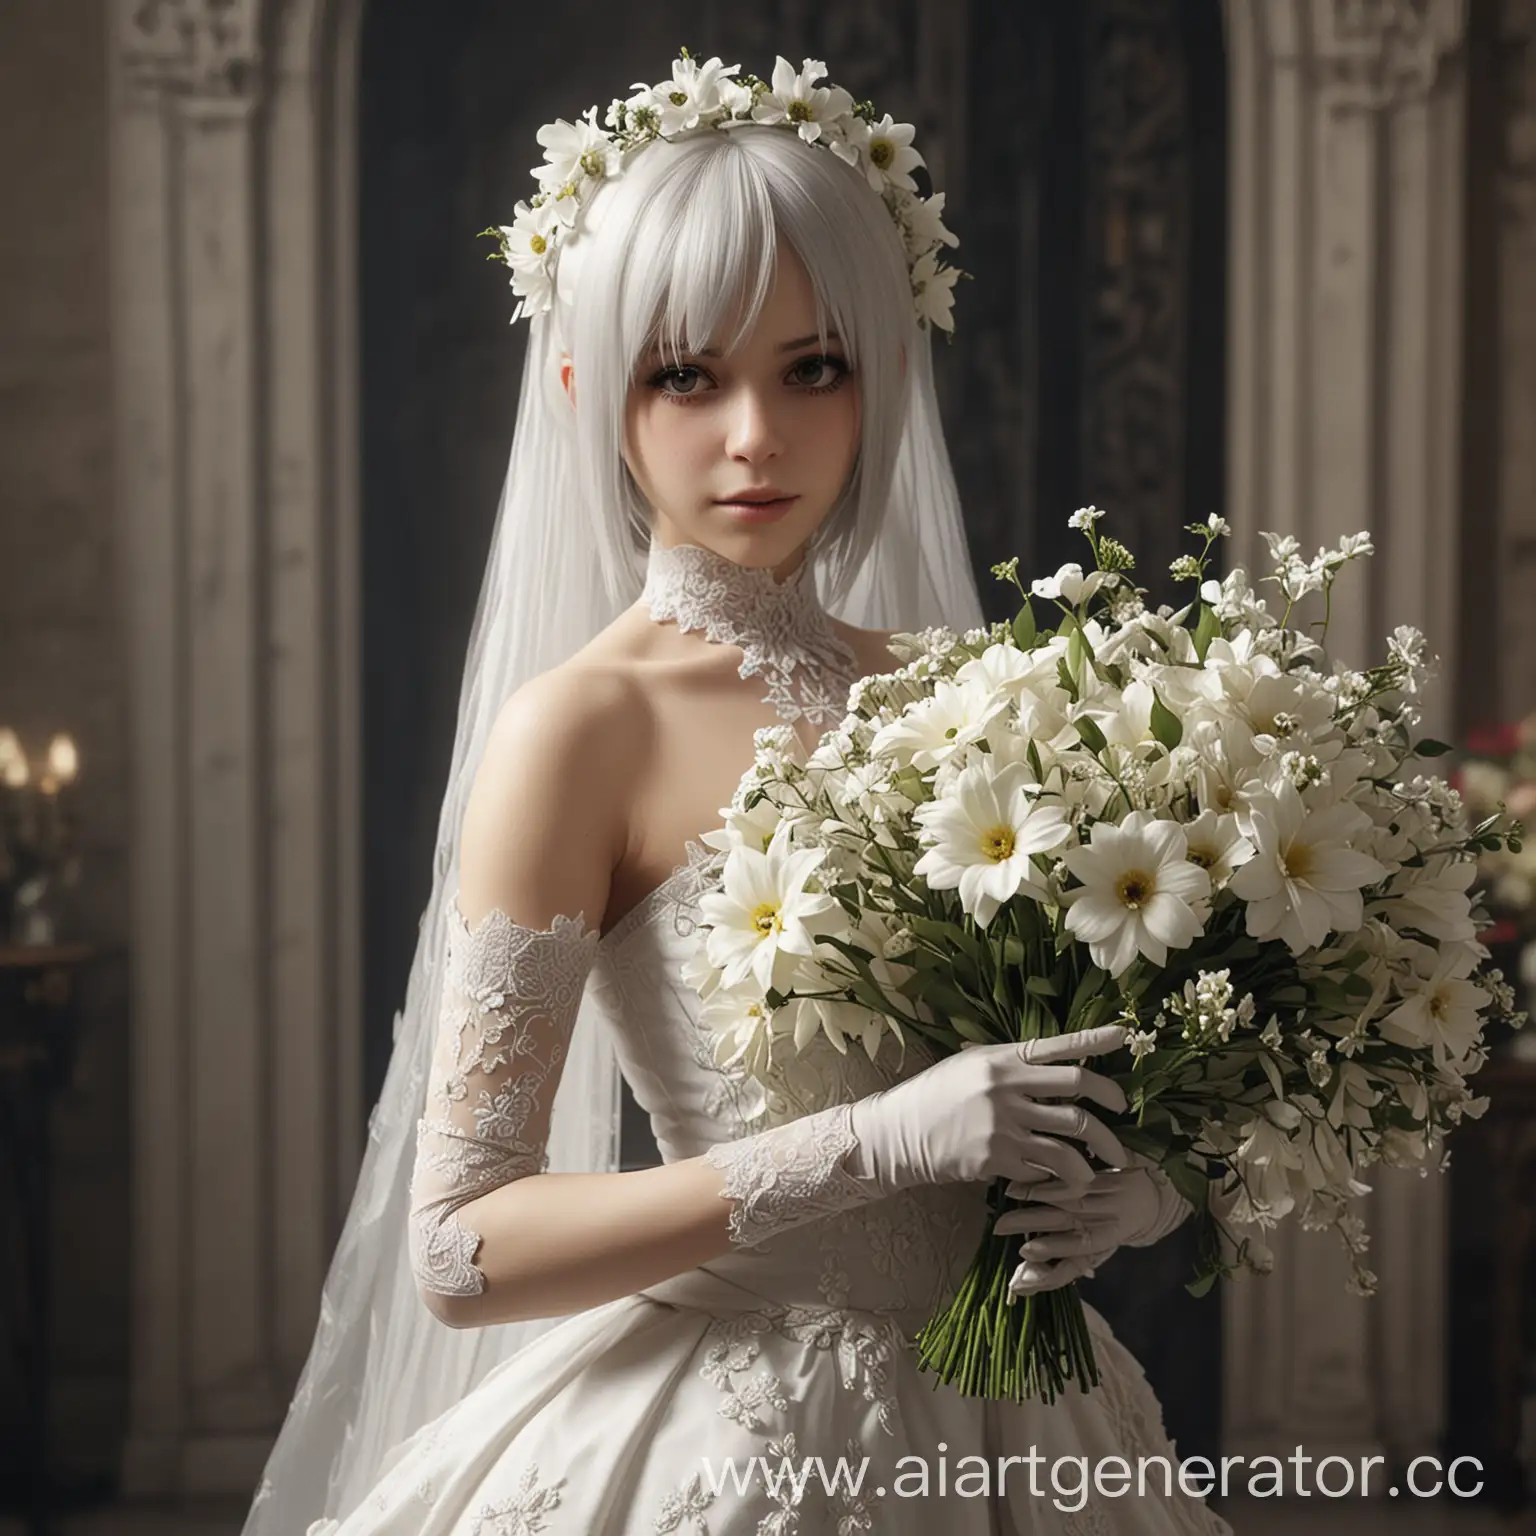 Yorha-2B-and-Odeta-Celebrating-Eternal-Union-with-Floral-Bouquet